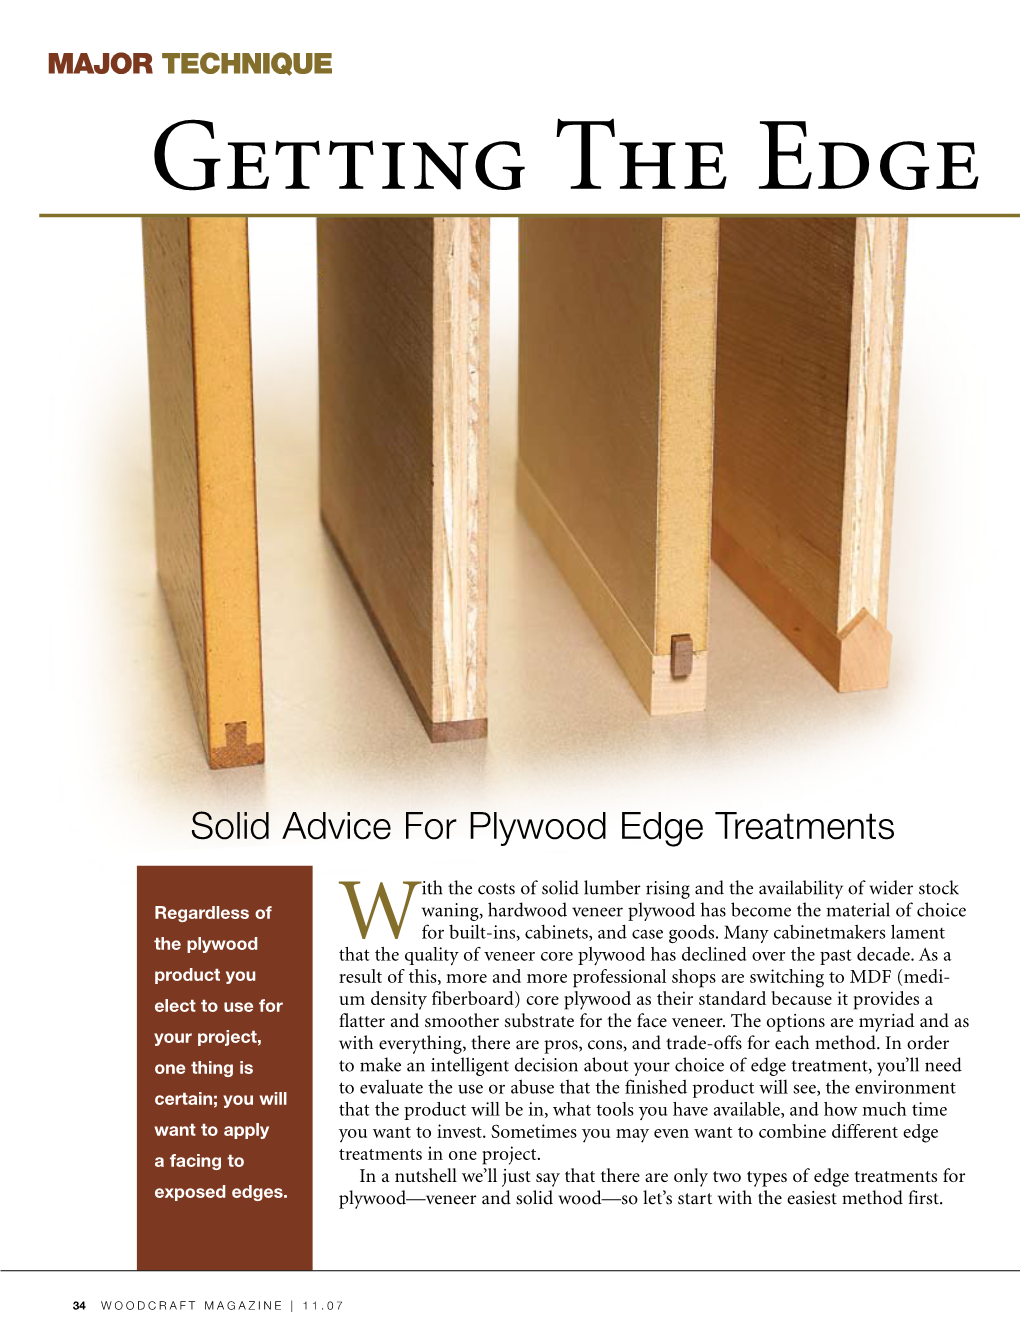 Getting the Edge on Plywood